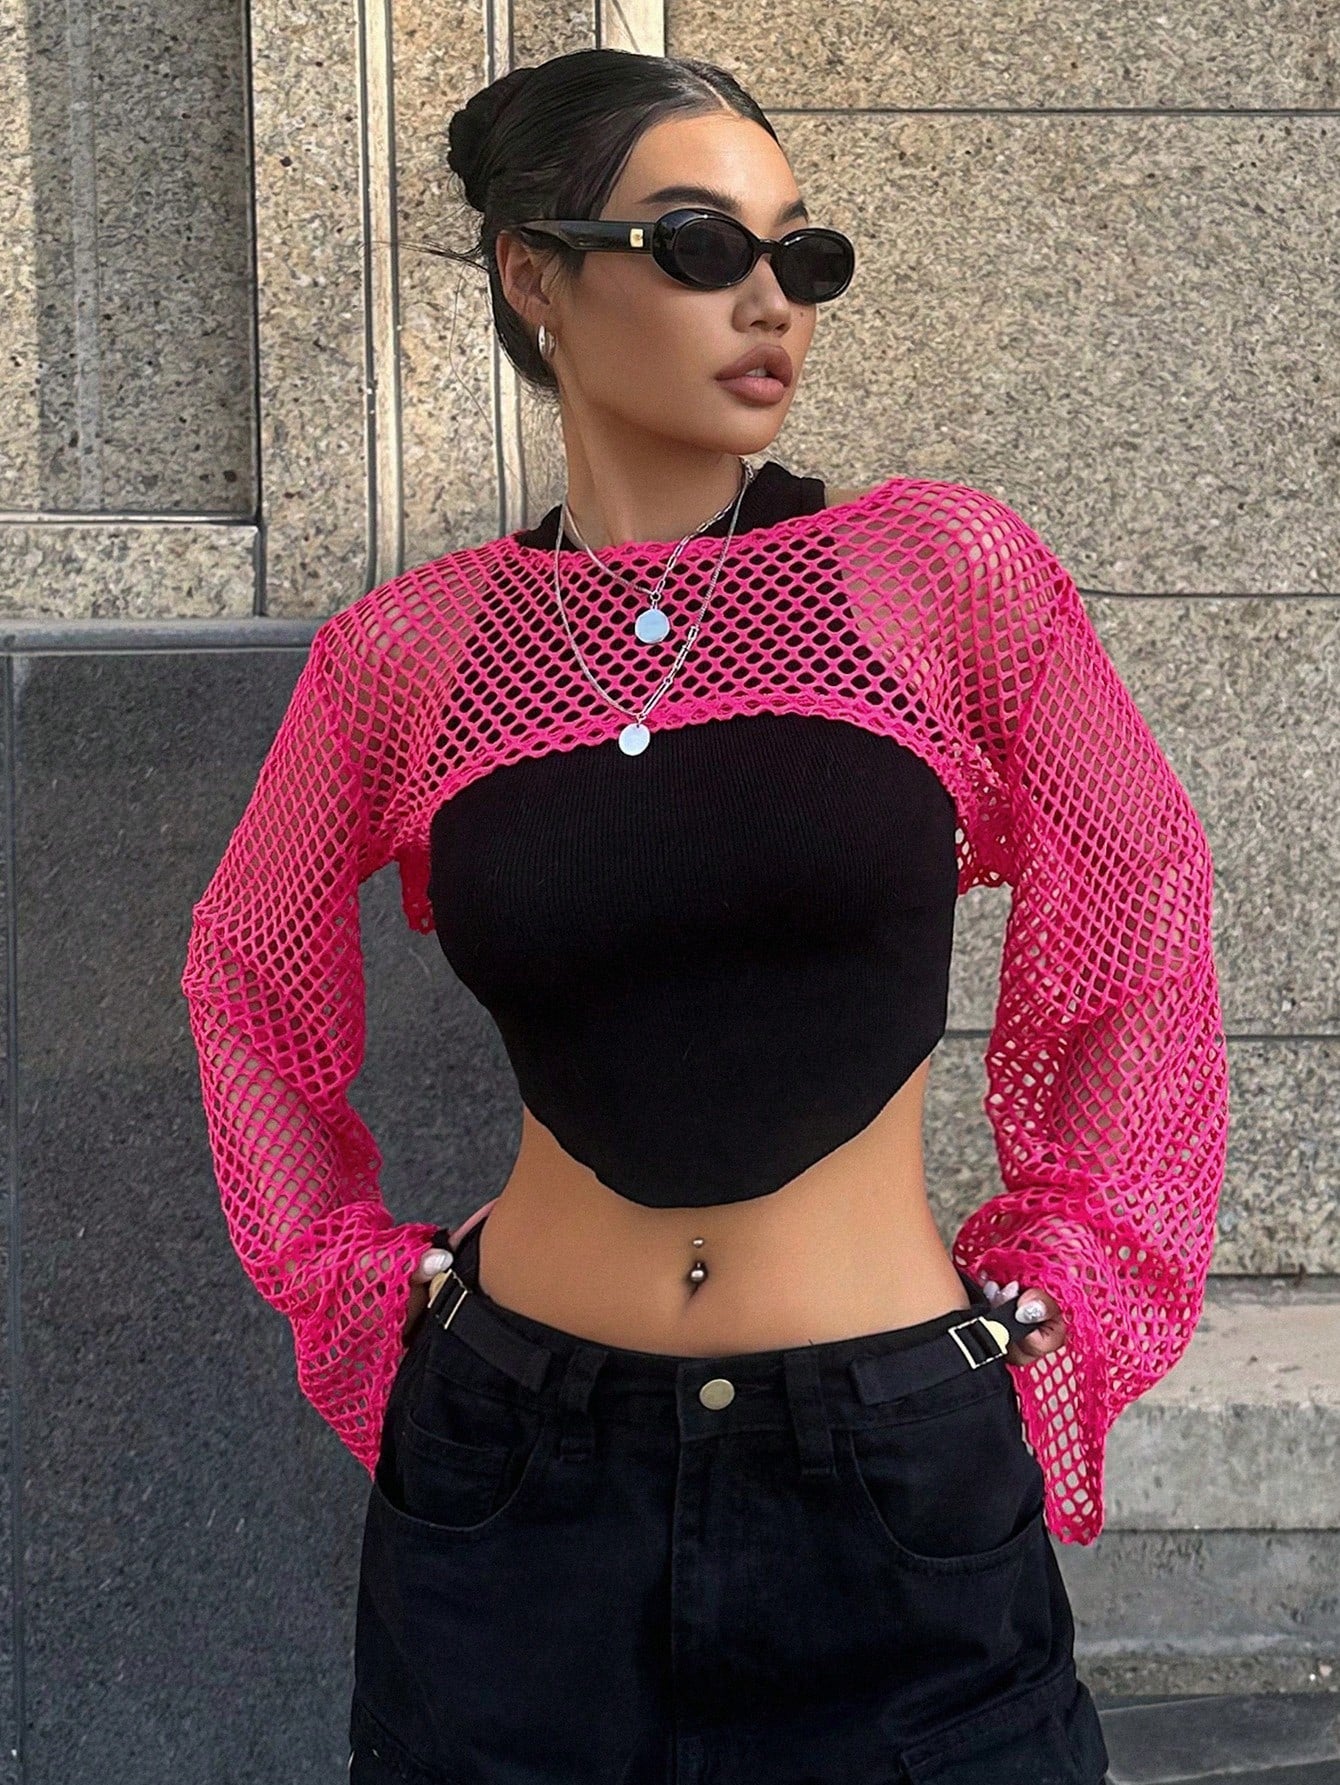 SHEIN DAZY Kpop Hollow Out Super Crop Top Without Cami Top